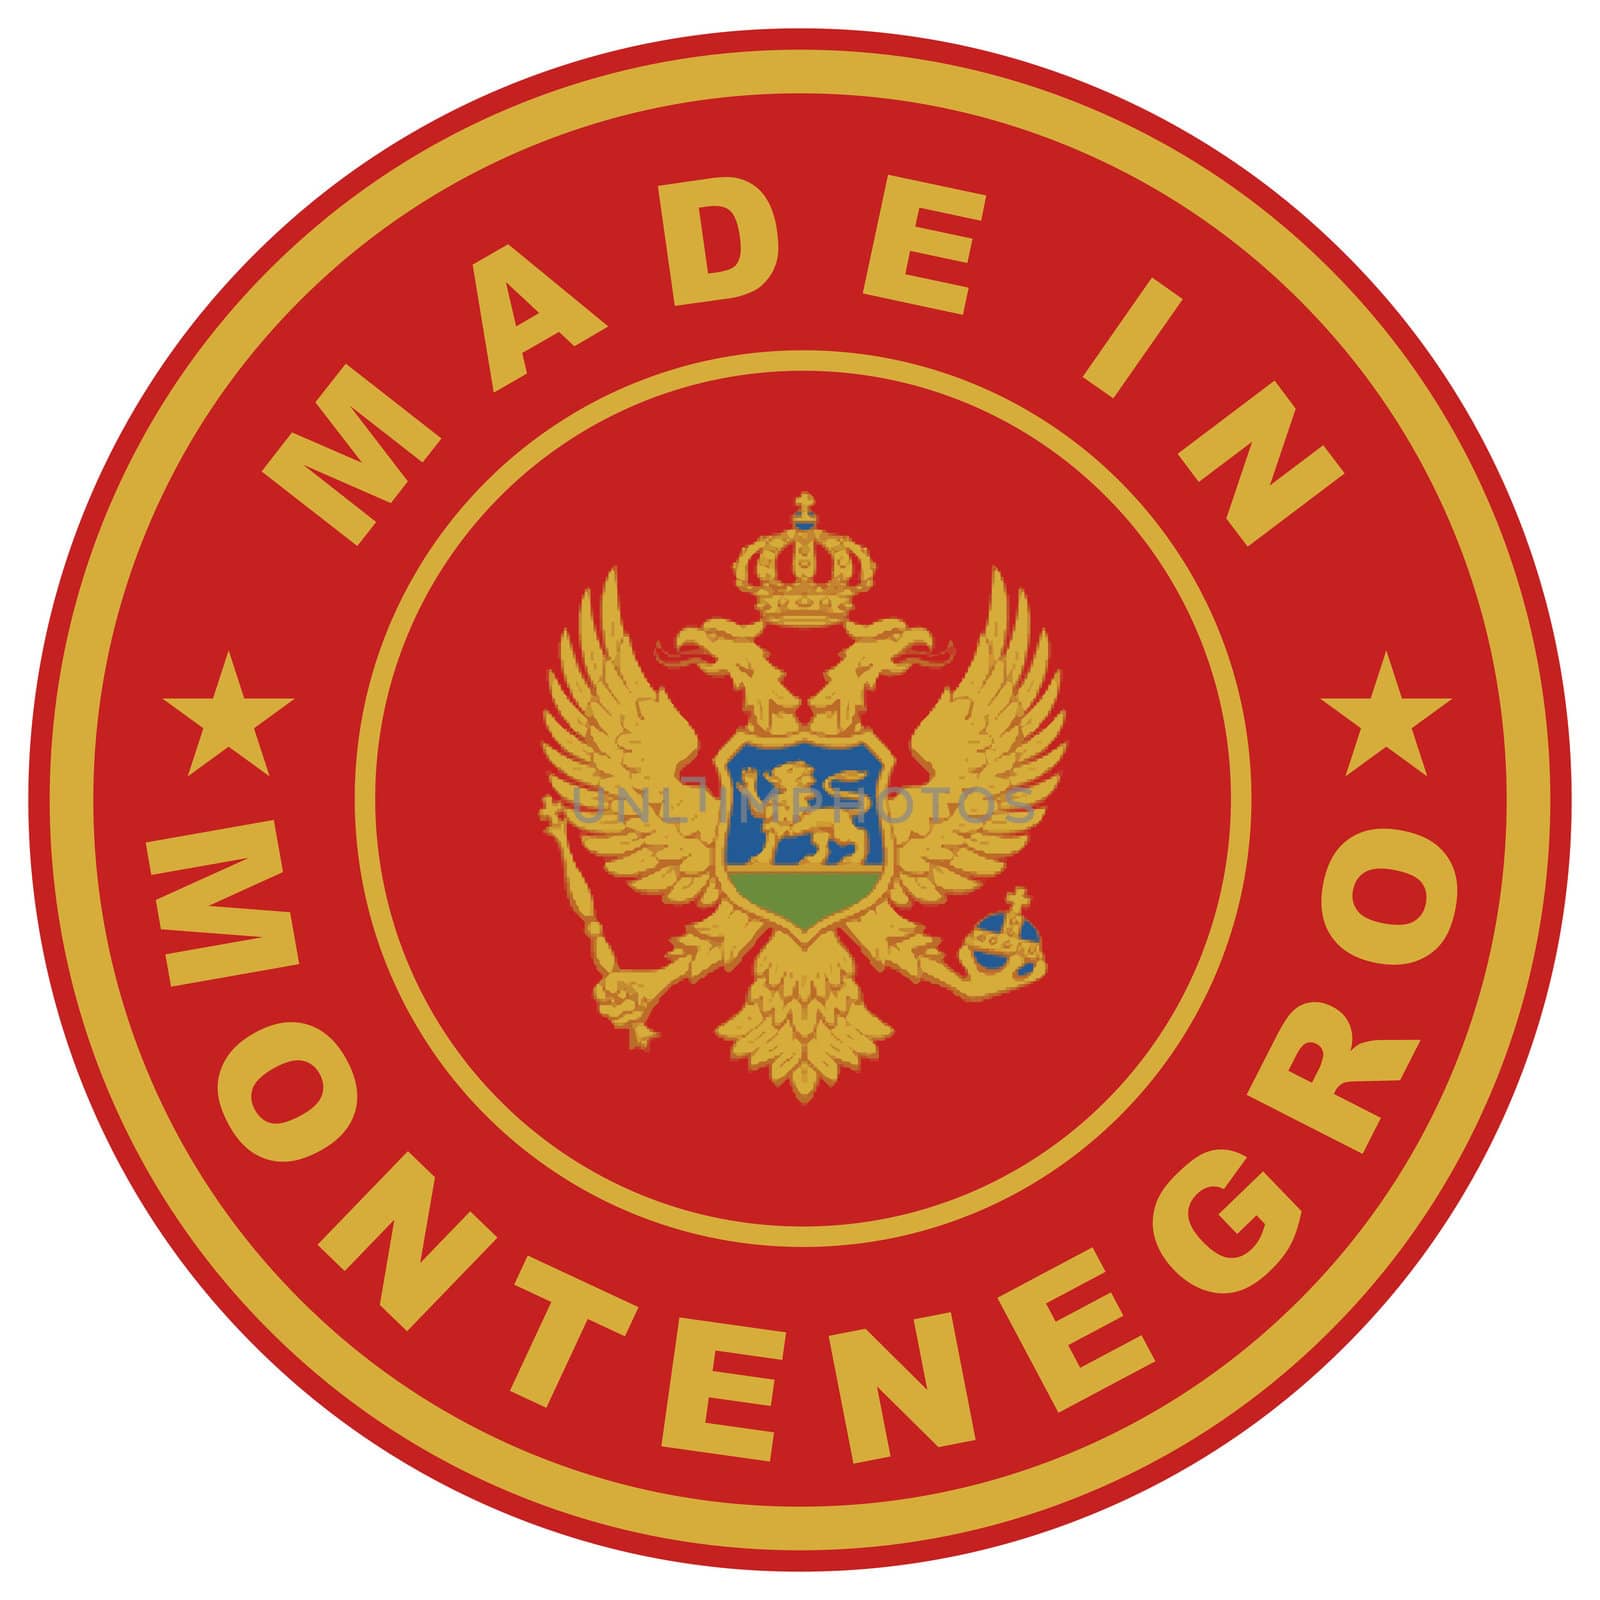 made in montenegro by tony4urban